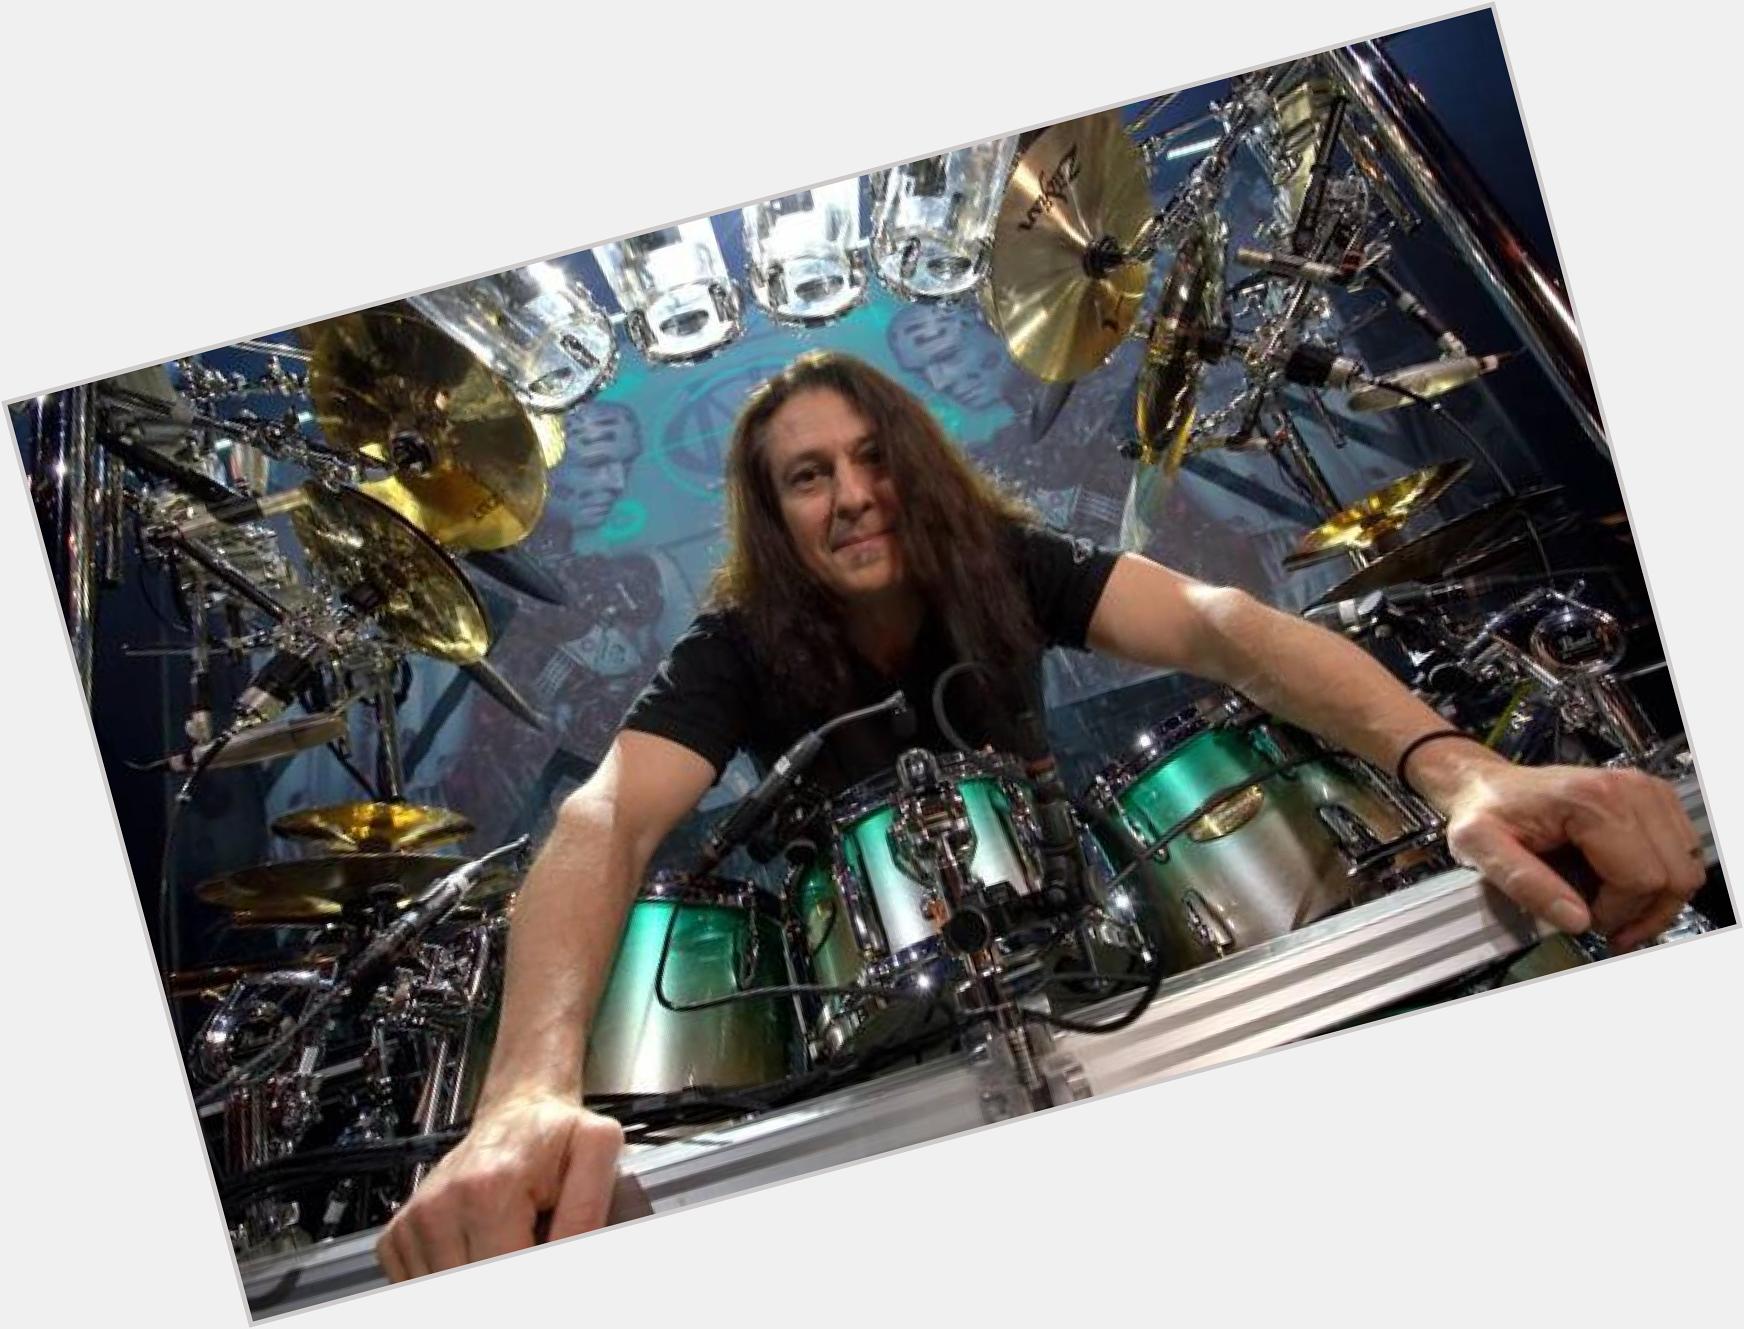 <a href="/hot-men/mike-mangini/is-he-married-christian-left-handed-what-religion">Mike Mangini</a> Average body,  dark brown hair & hairstyles